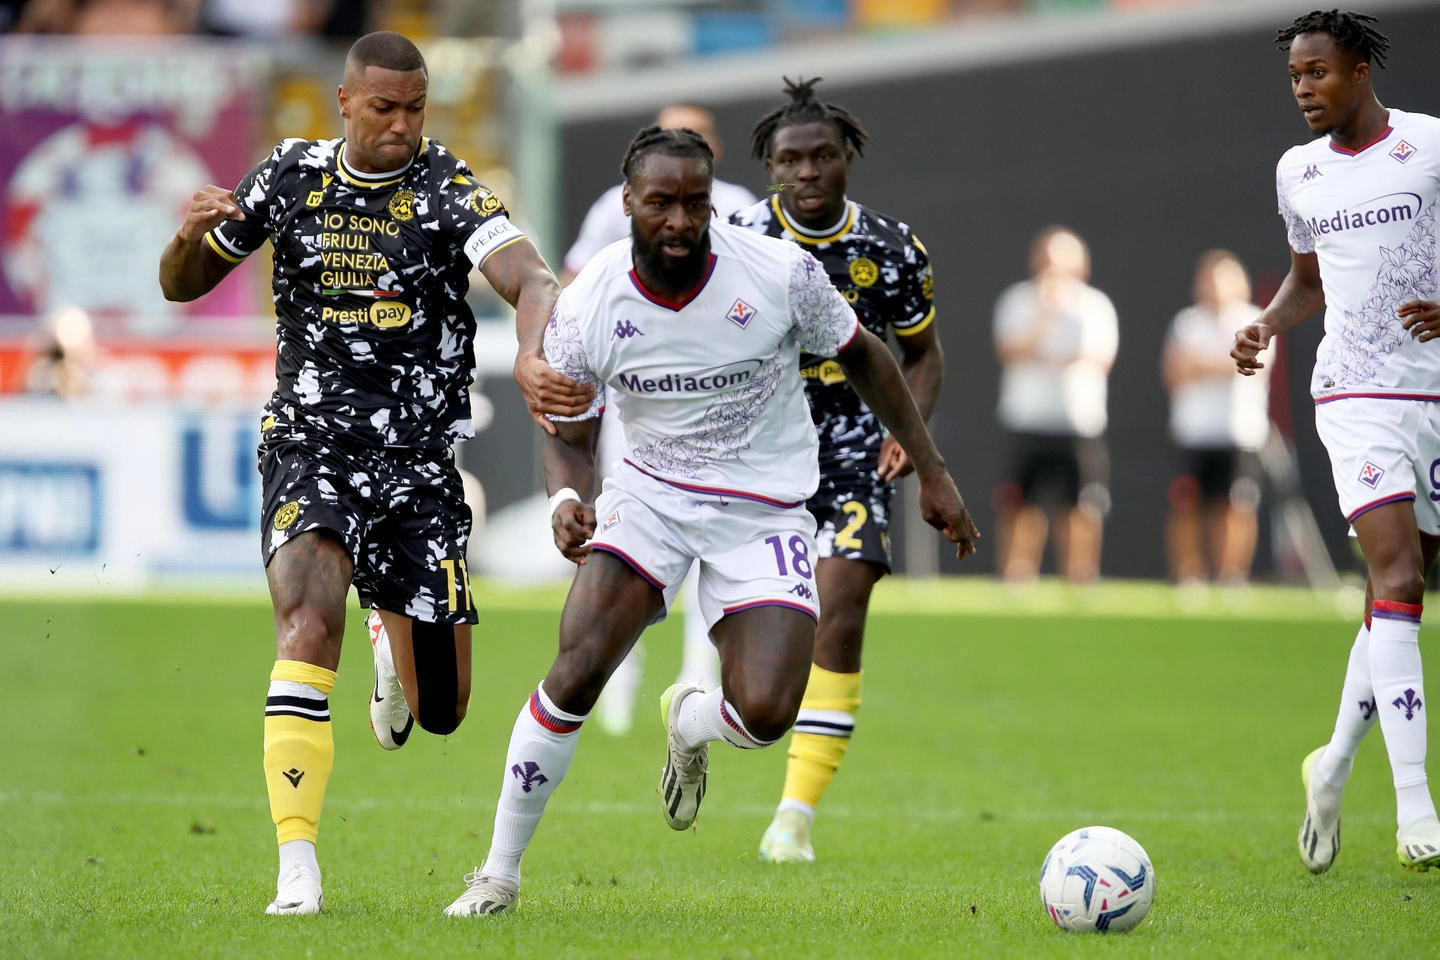 Udinese's Souza Silva Walace (L) and Fiorentina's M'bala Nzola in action during the Italian Serie A soccer match Udinese Calcio vs ACF Fiorentina at the Friuli - Dacia Arena stadium in Udine, Italy, 24 September 2023. ANSA / GABRIELE MENIS